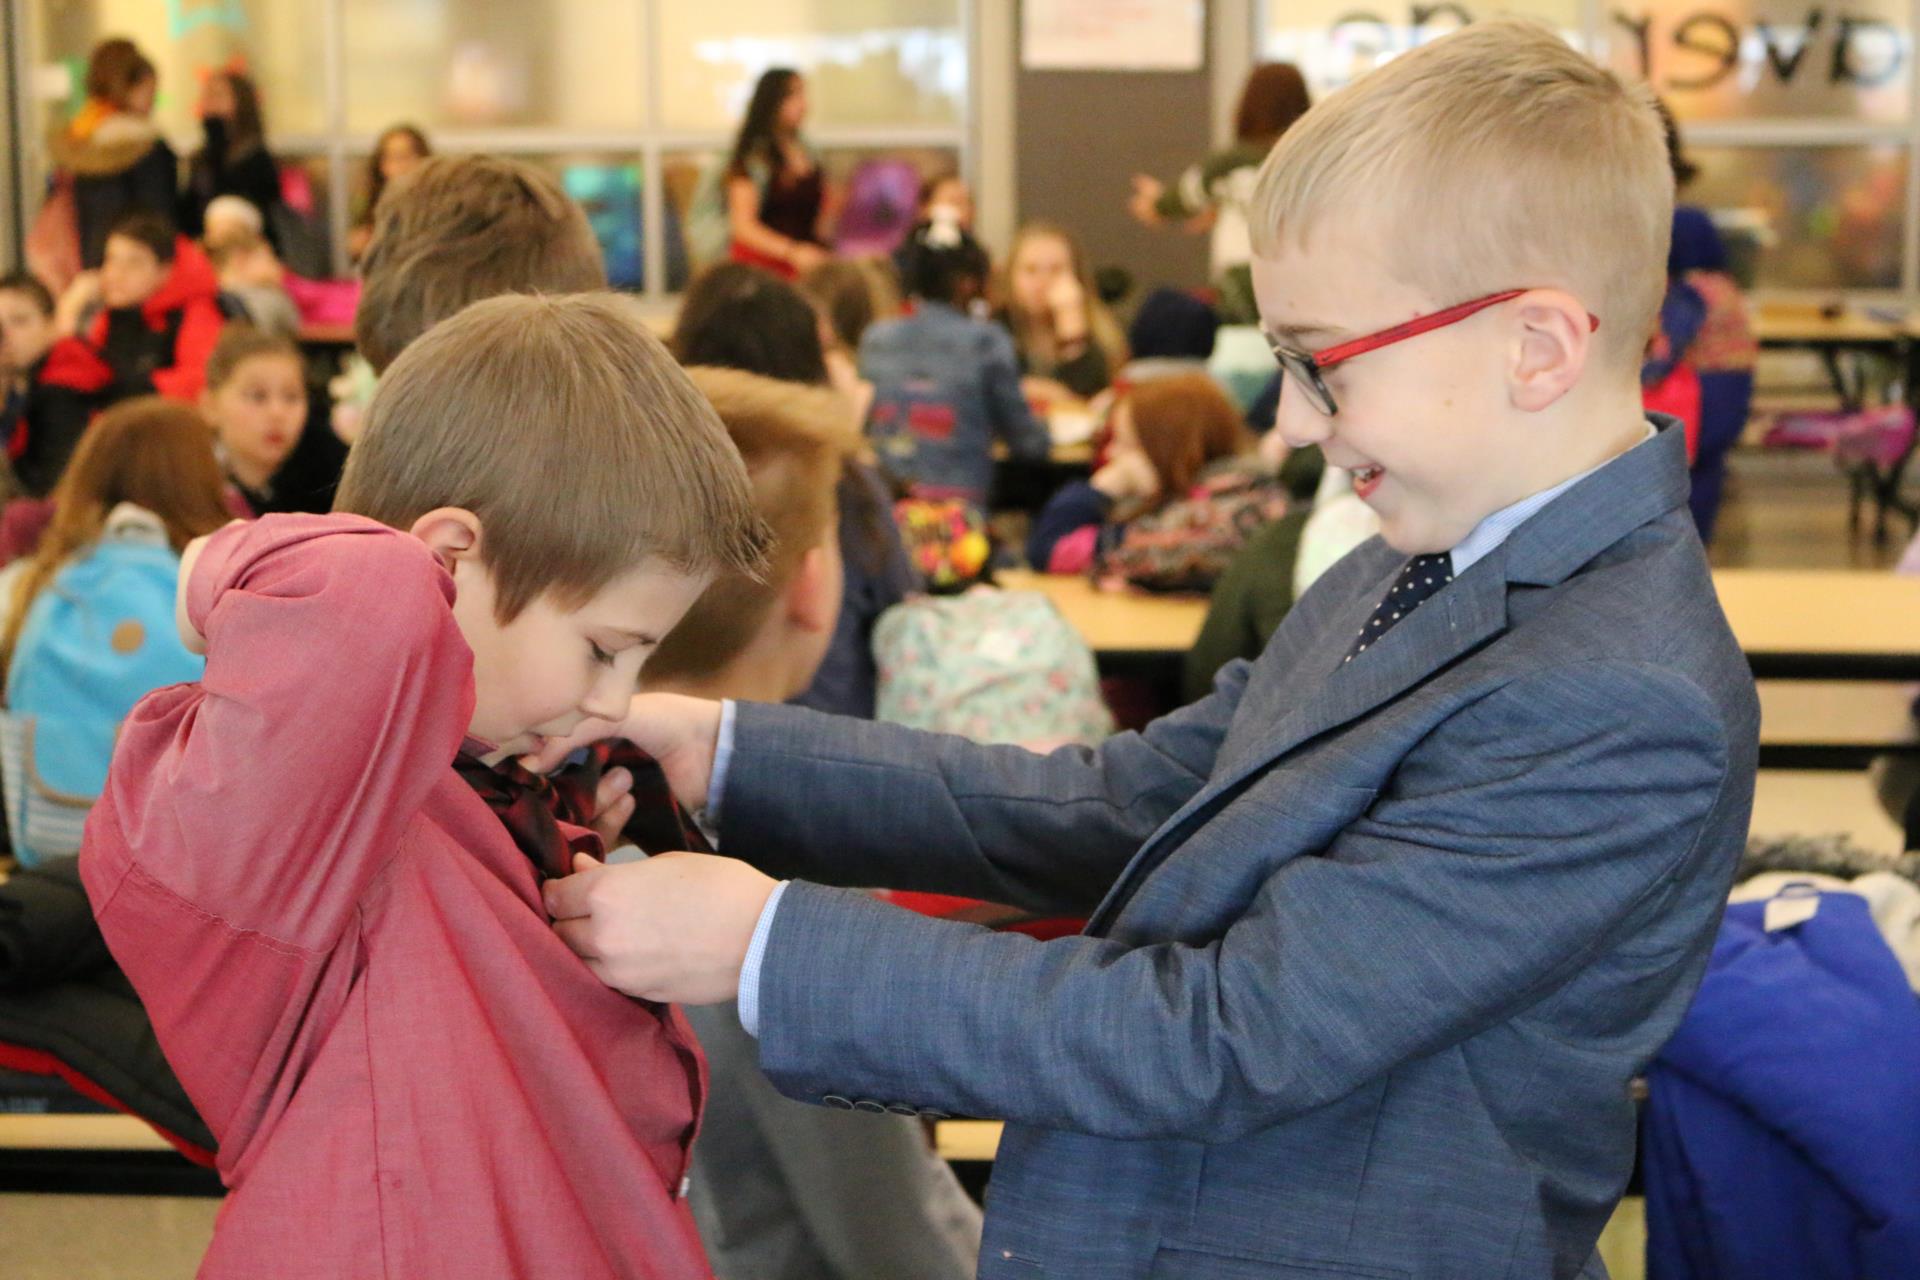 Student helps another student tie a tie.